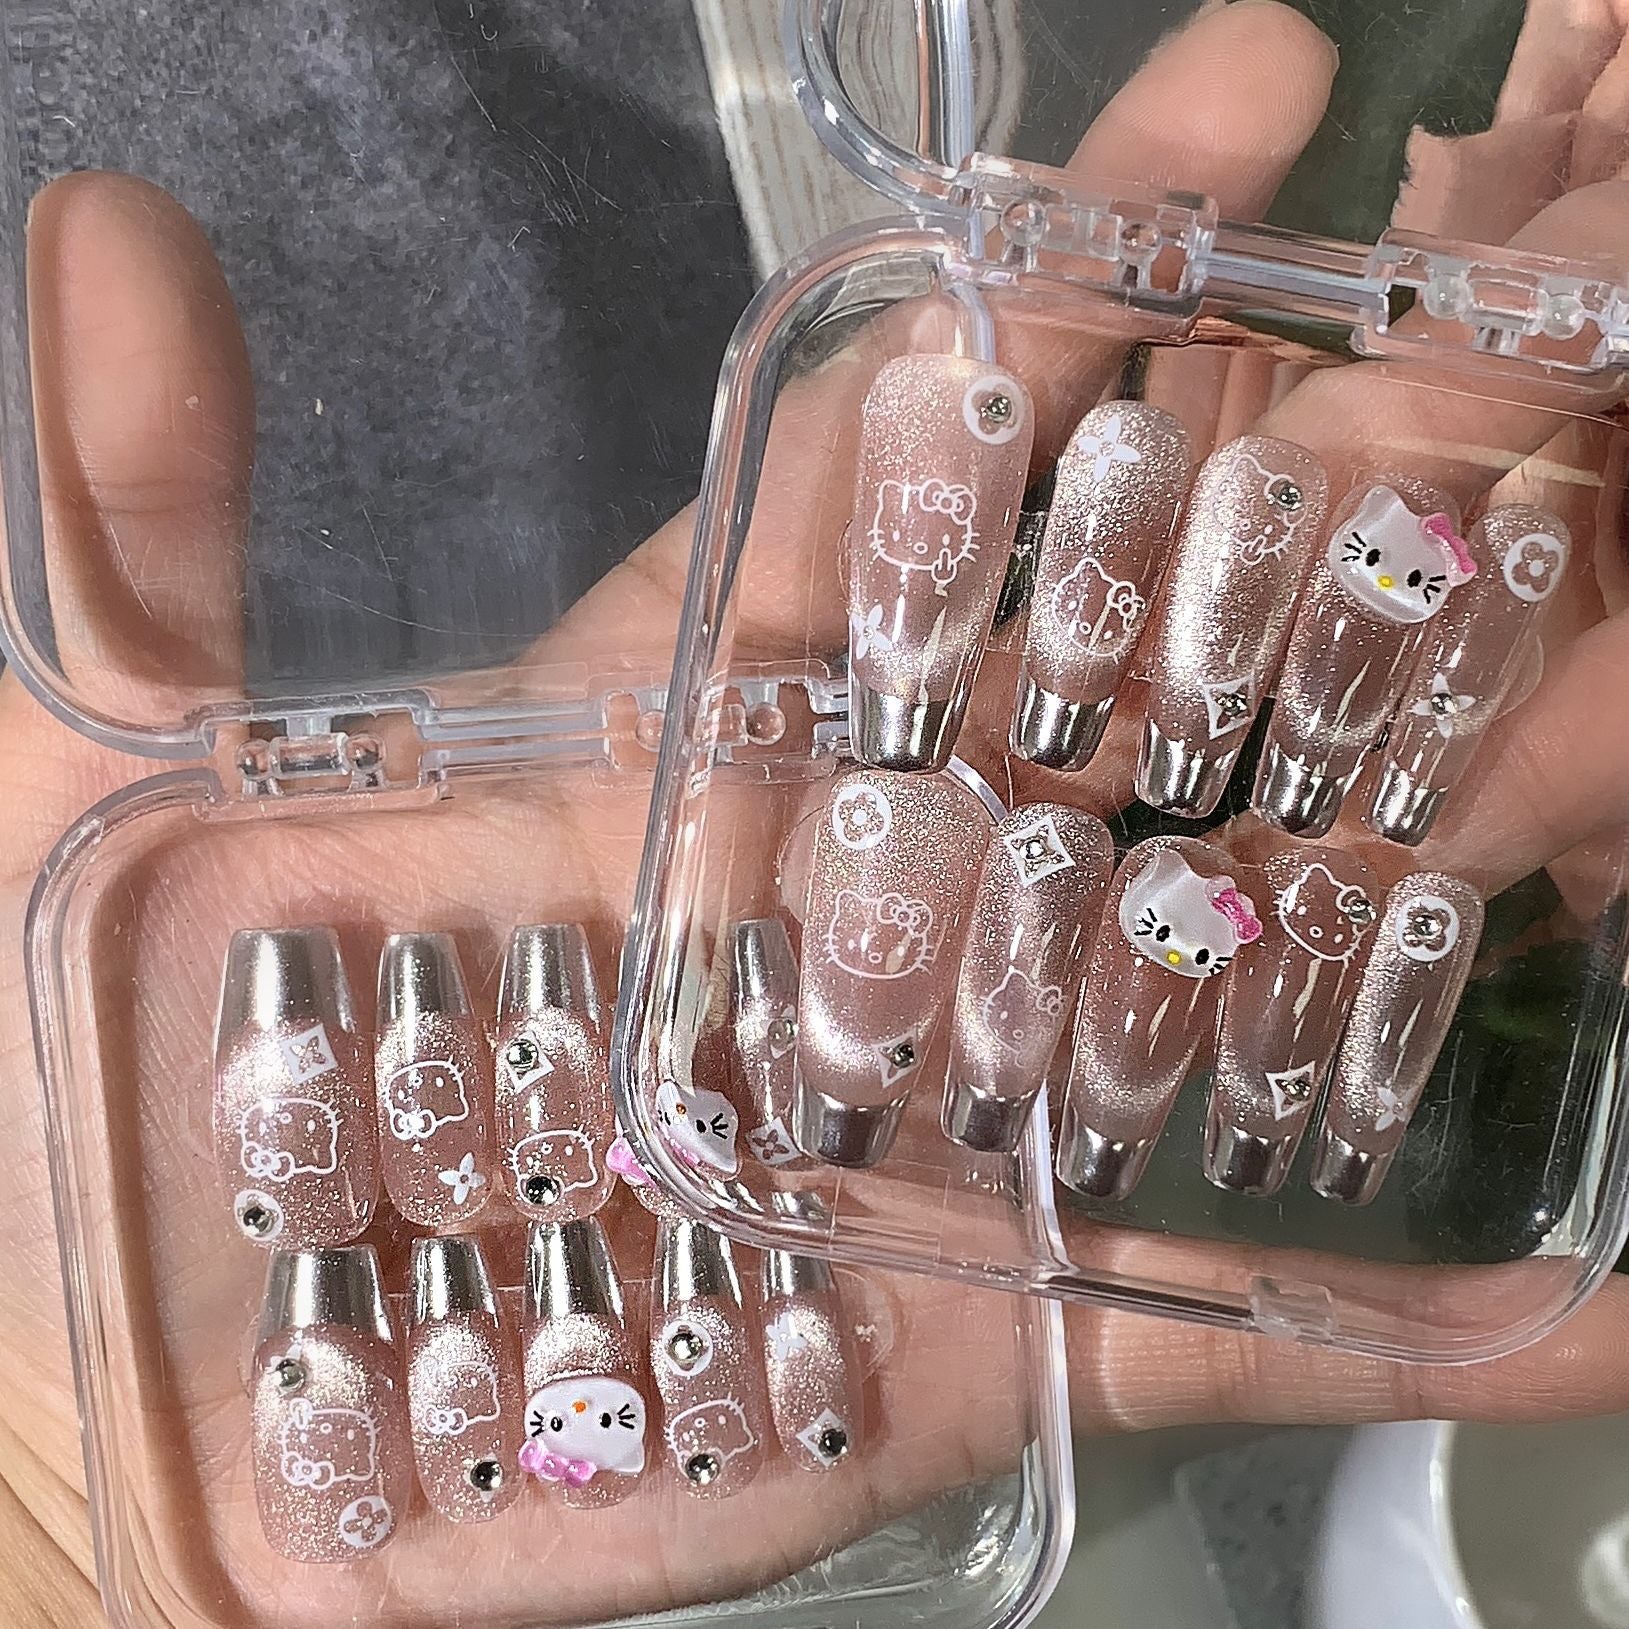 HELLO KITTY-TEN PIECES OF HANDCRAFTED PRESS ON NAIL